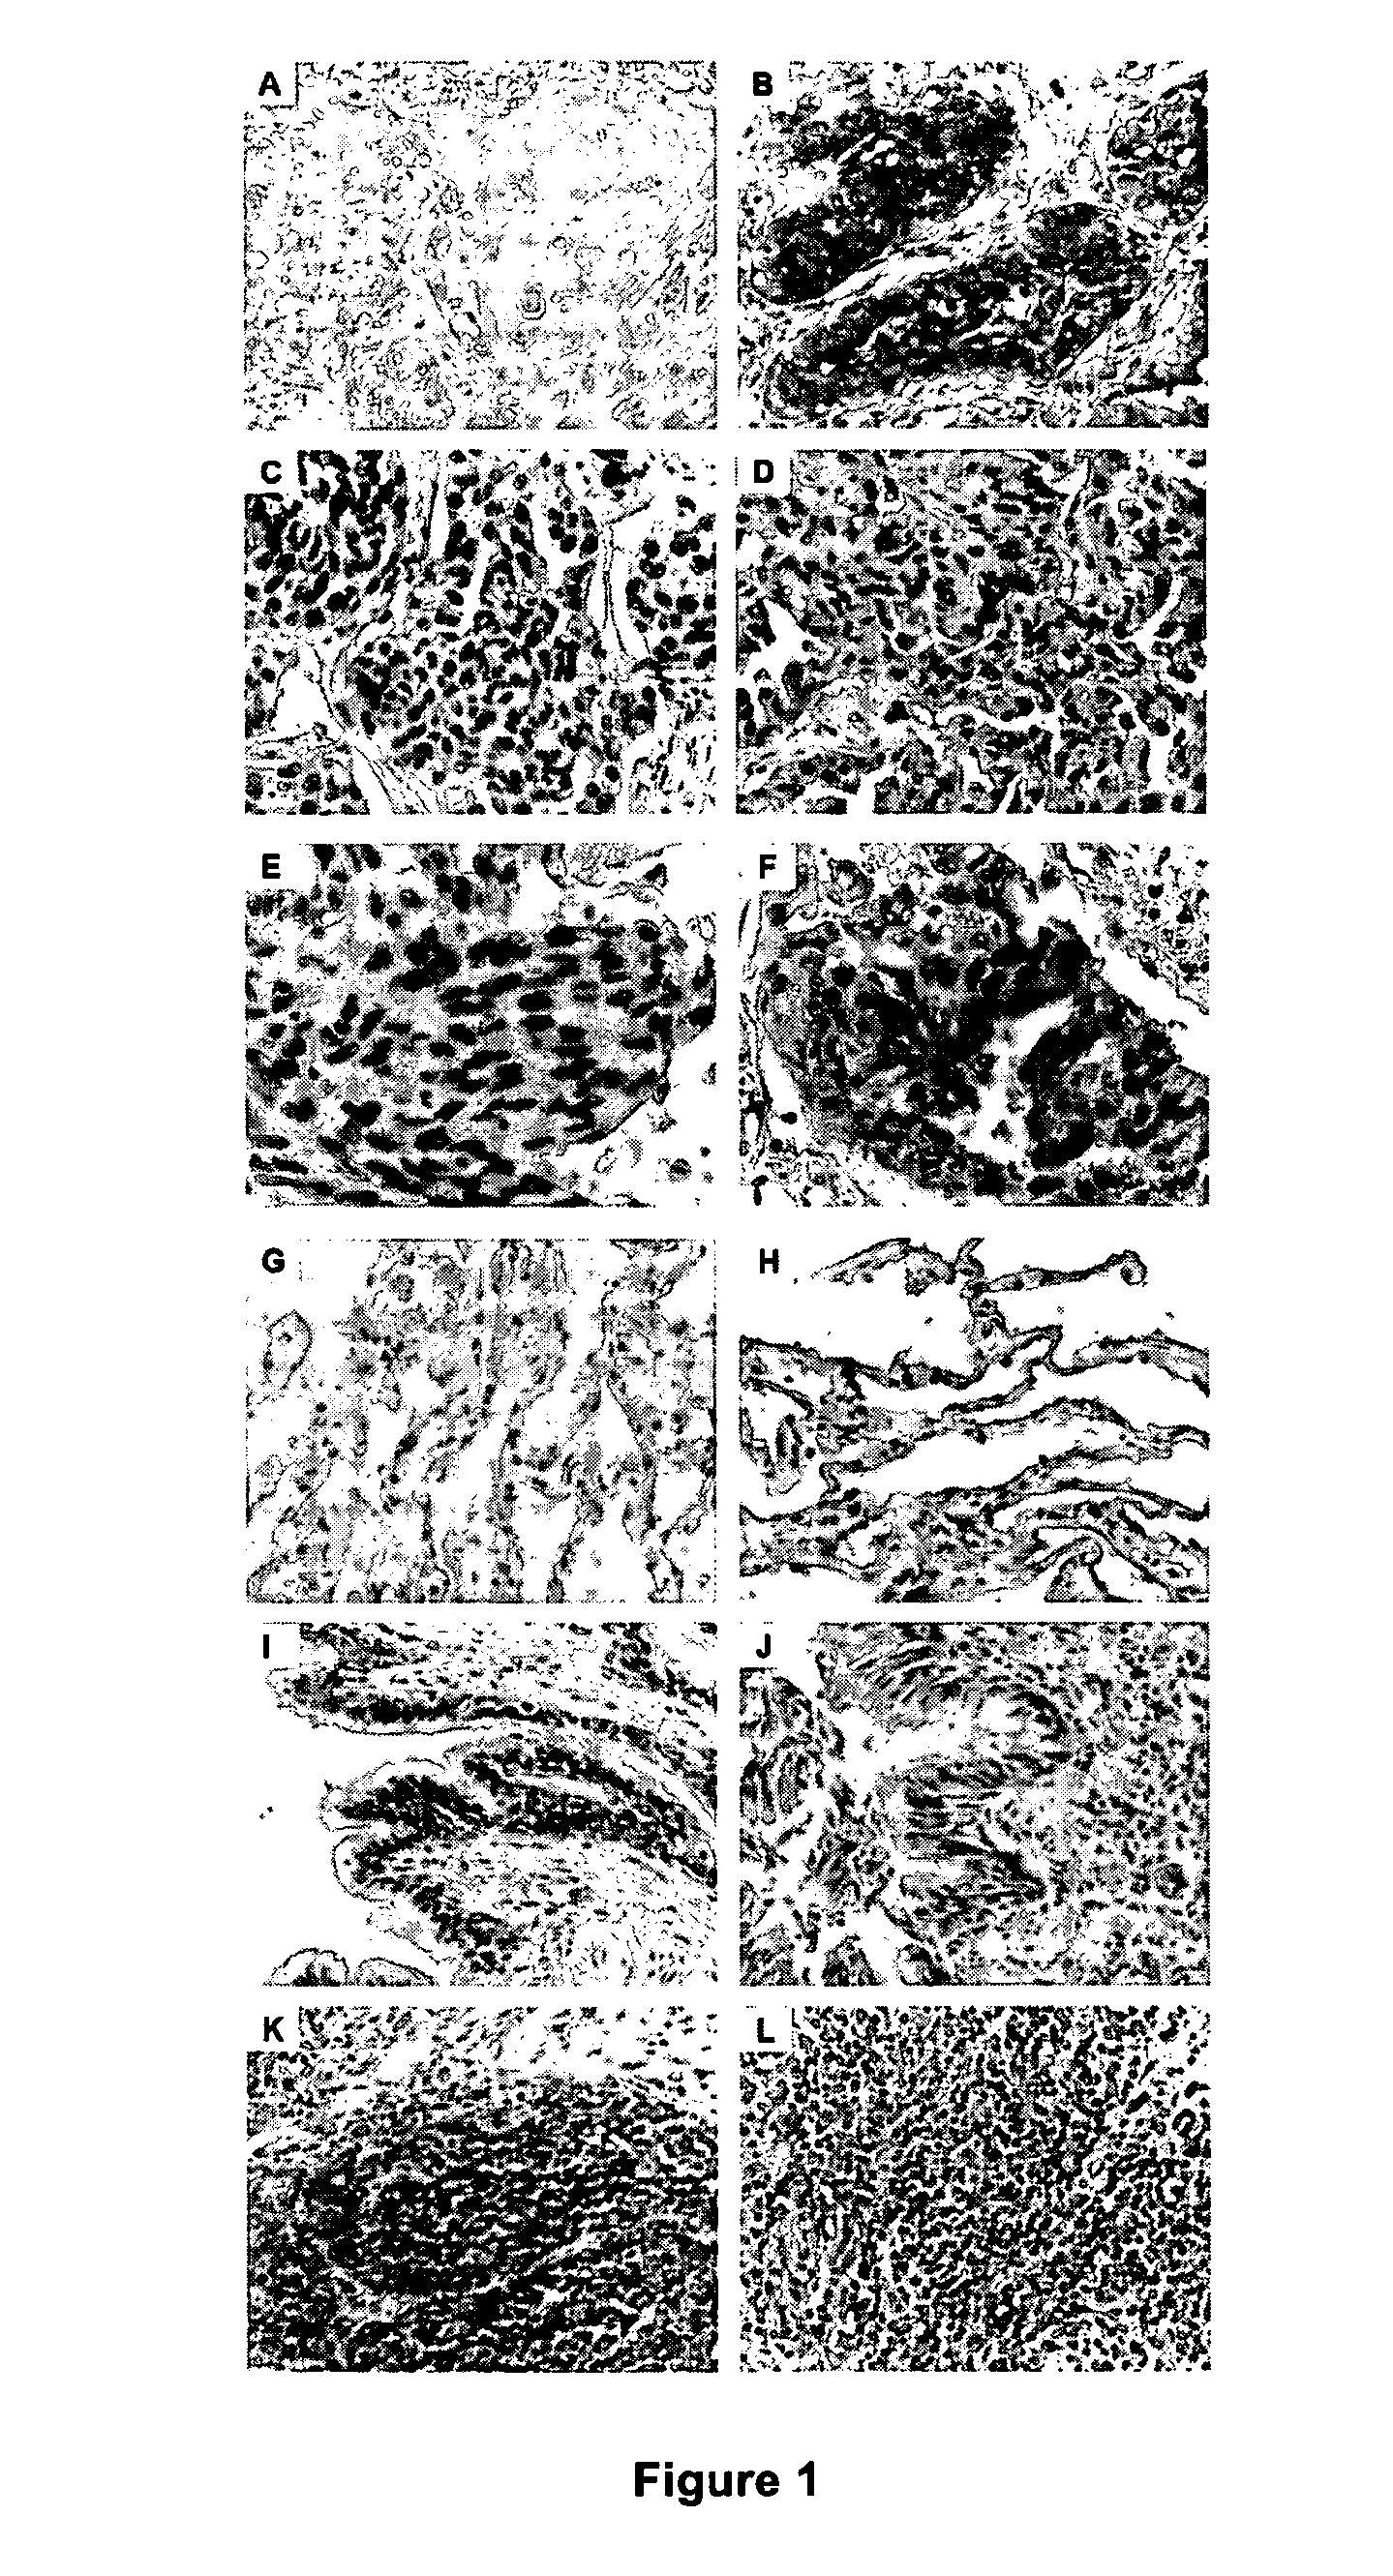 Methods for Predicting the Response to Anti-Cancer Treatment with an Agonist of TLR7 or an Agonist of TLR8